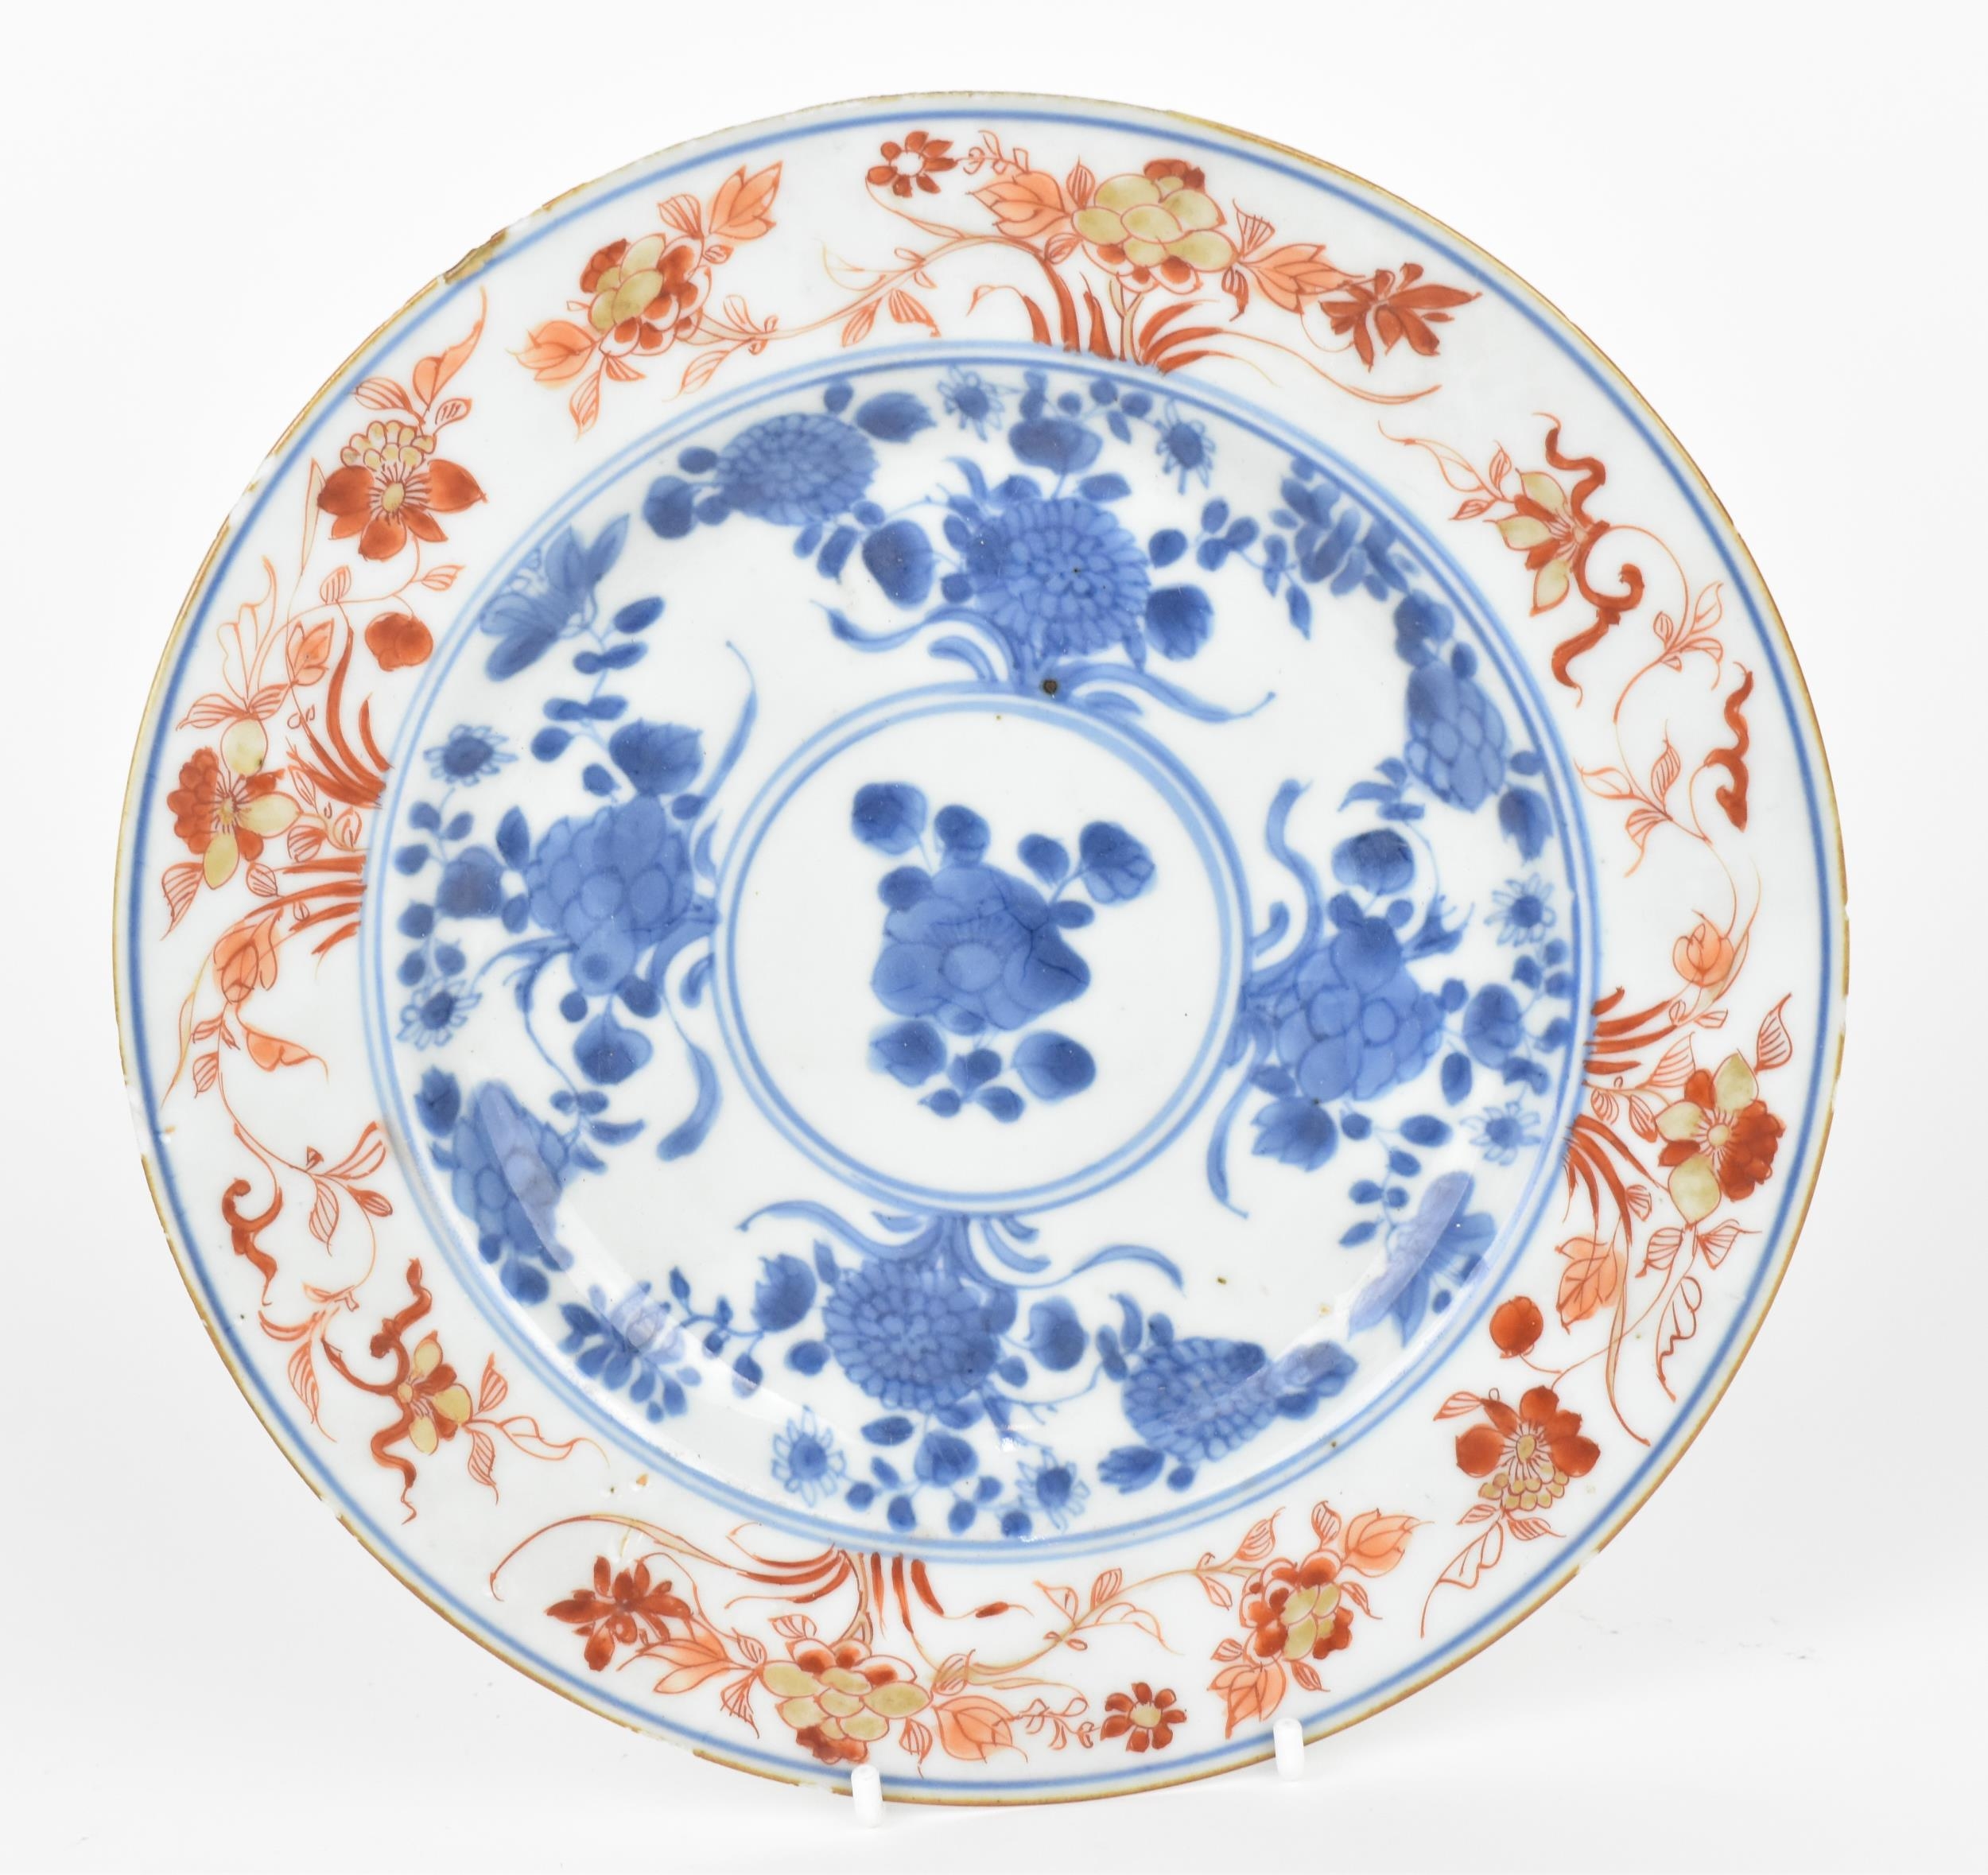 Three Chinese 18th century porcelain plates, to include two of octagonal form with willow pattern - Image 6 of 7